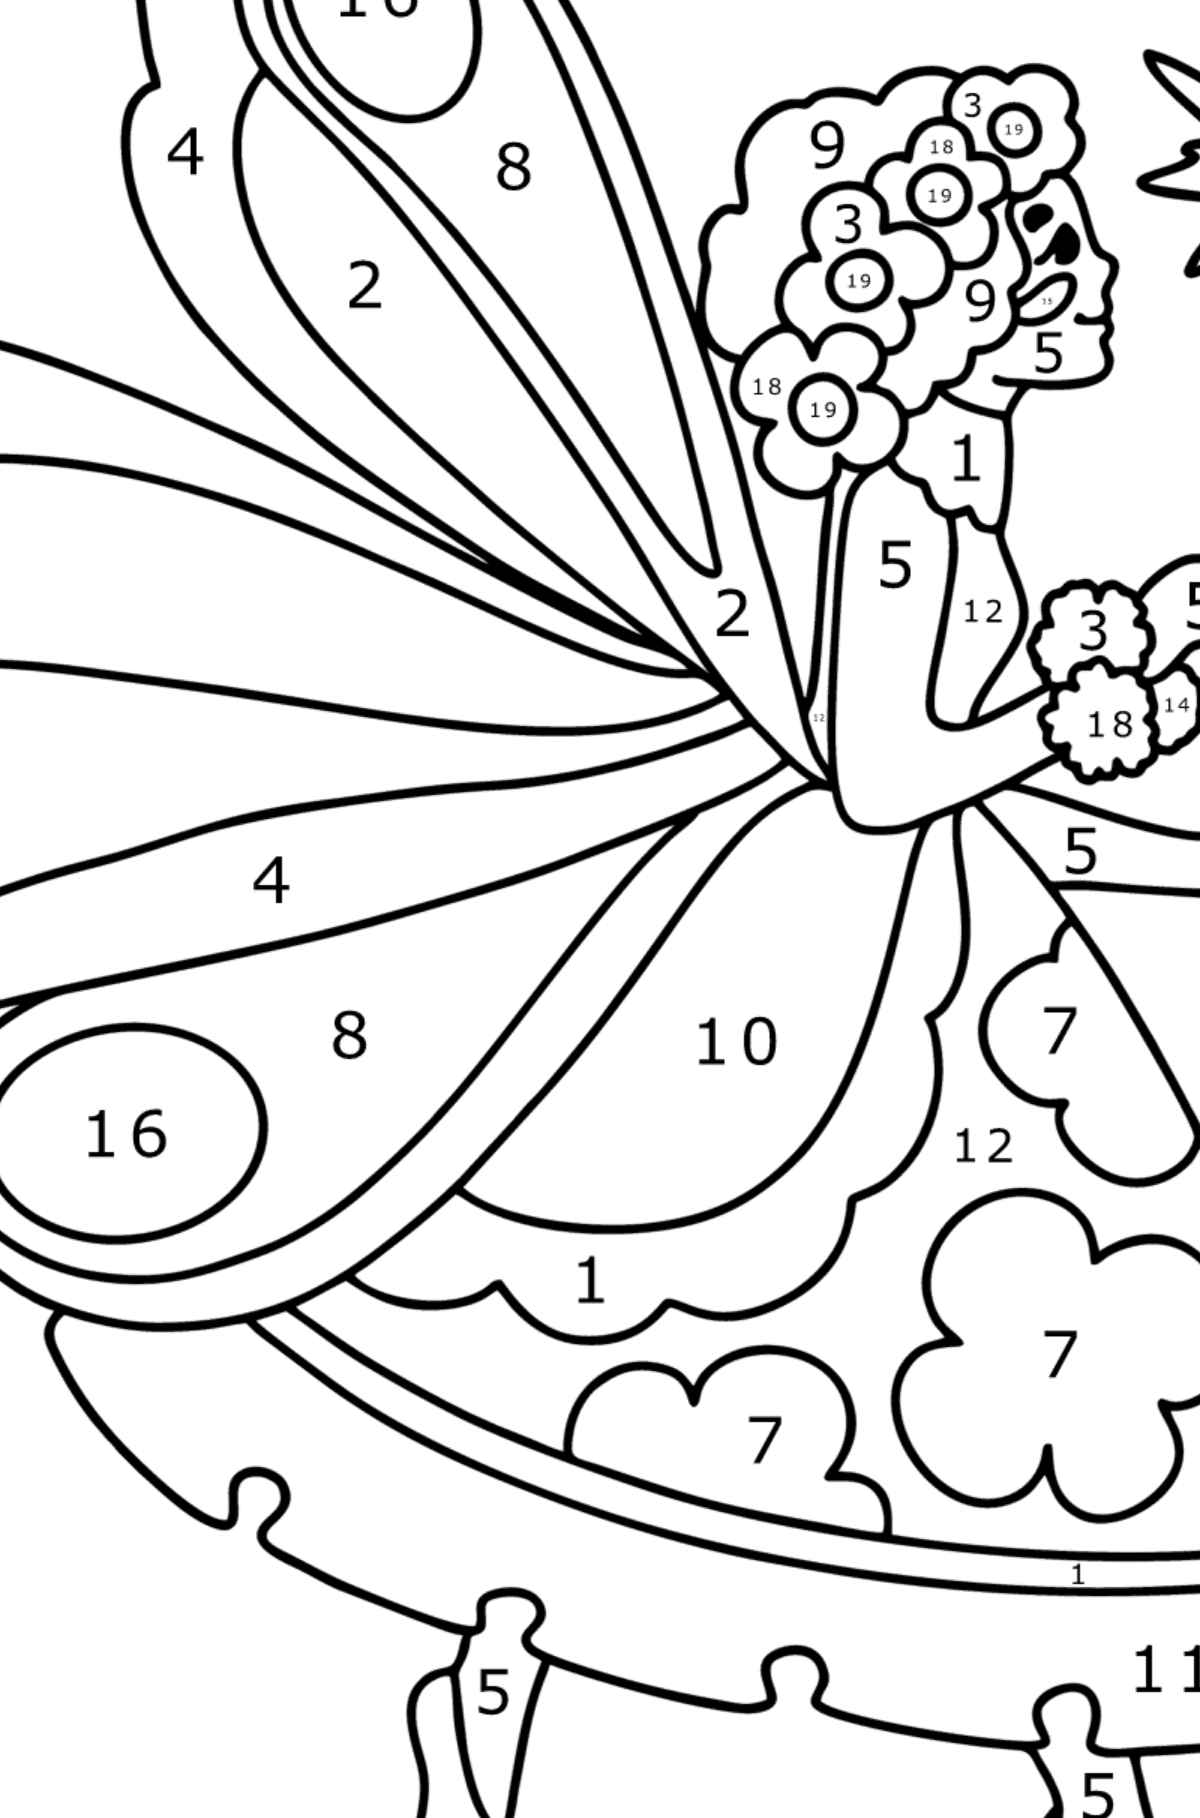 Kind fairy coloring page - Coloring by Numbers for Kids